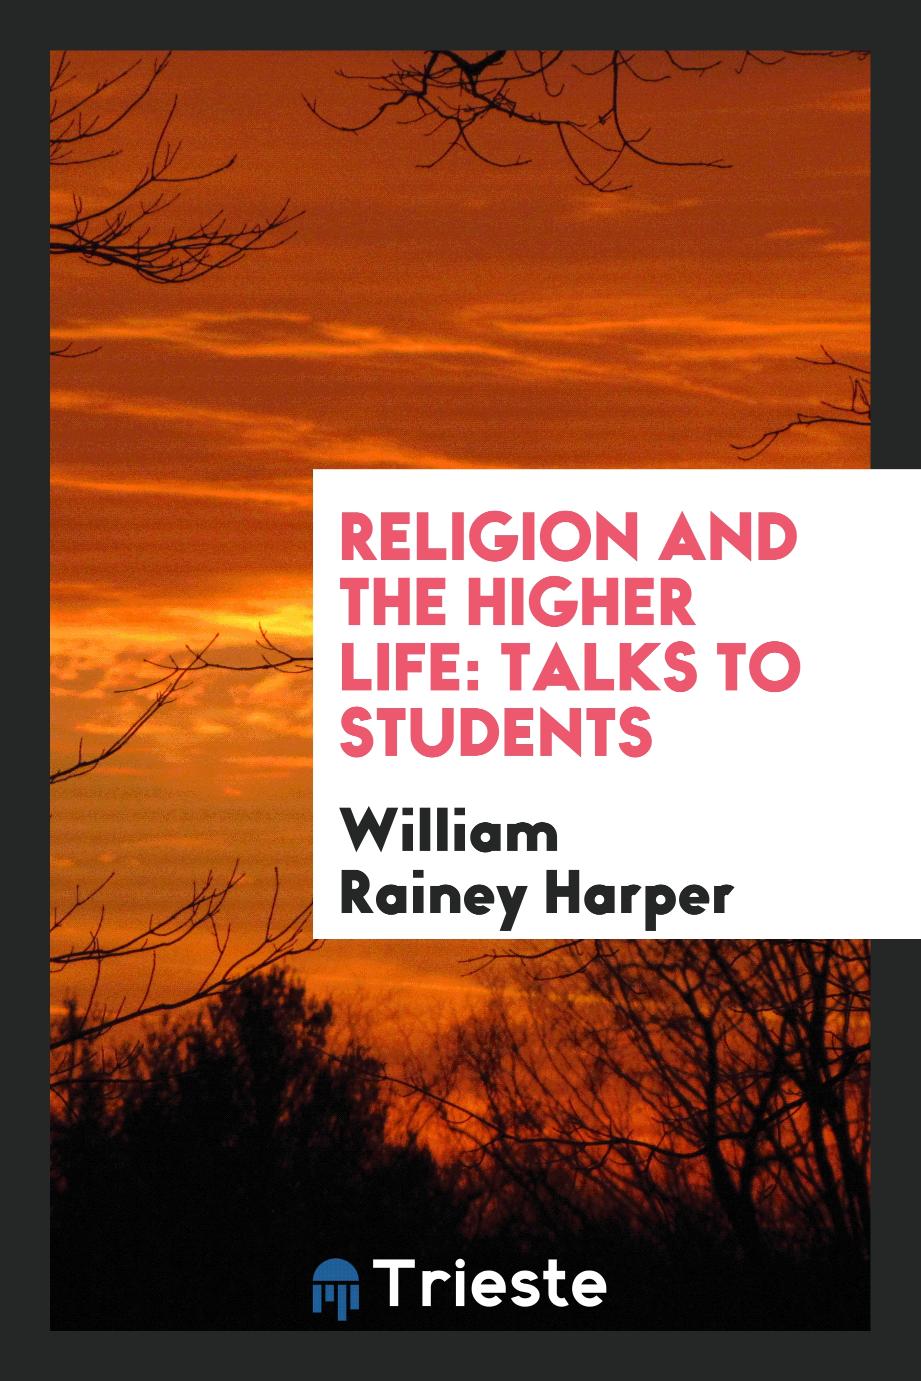 Religion and the higher life: talks to students